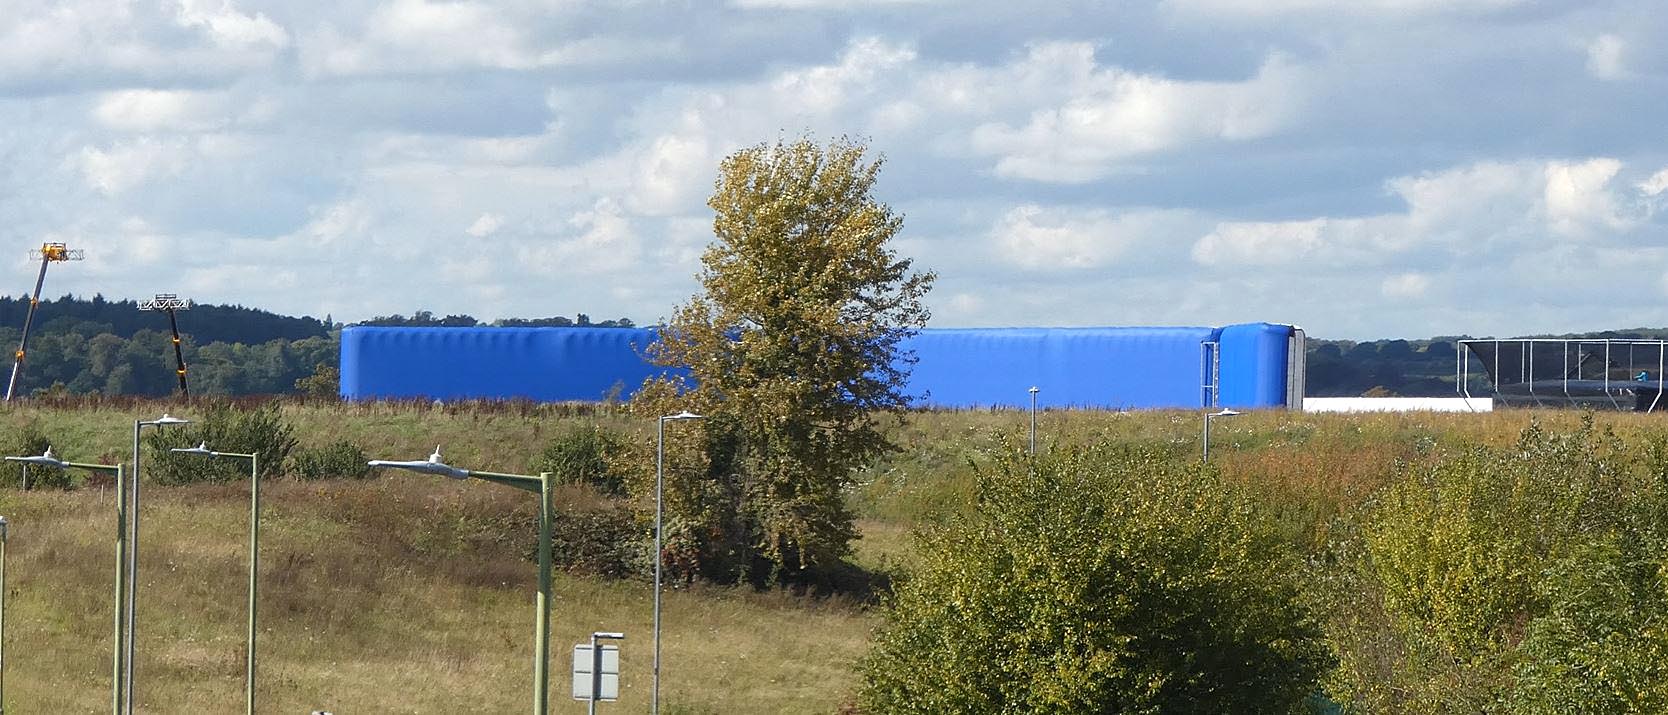 This could be the Largest inflatable Bluescreen seen on site.